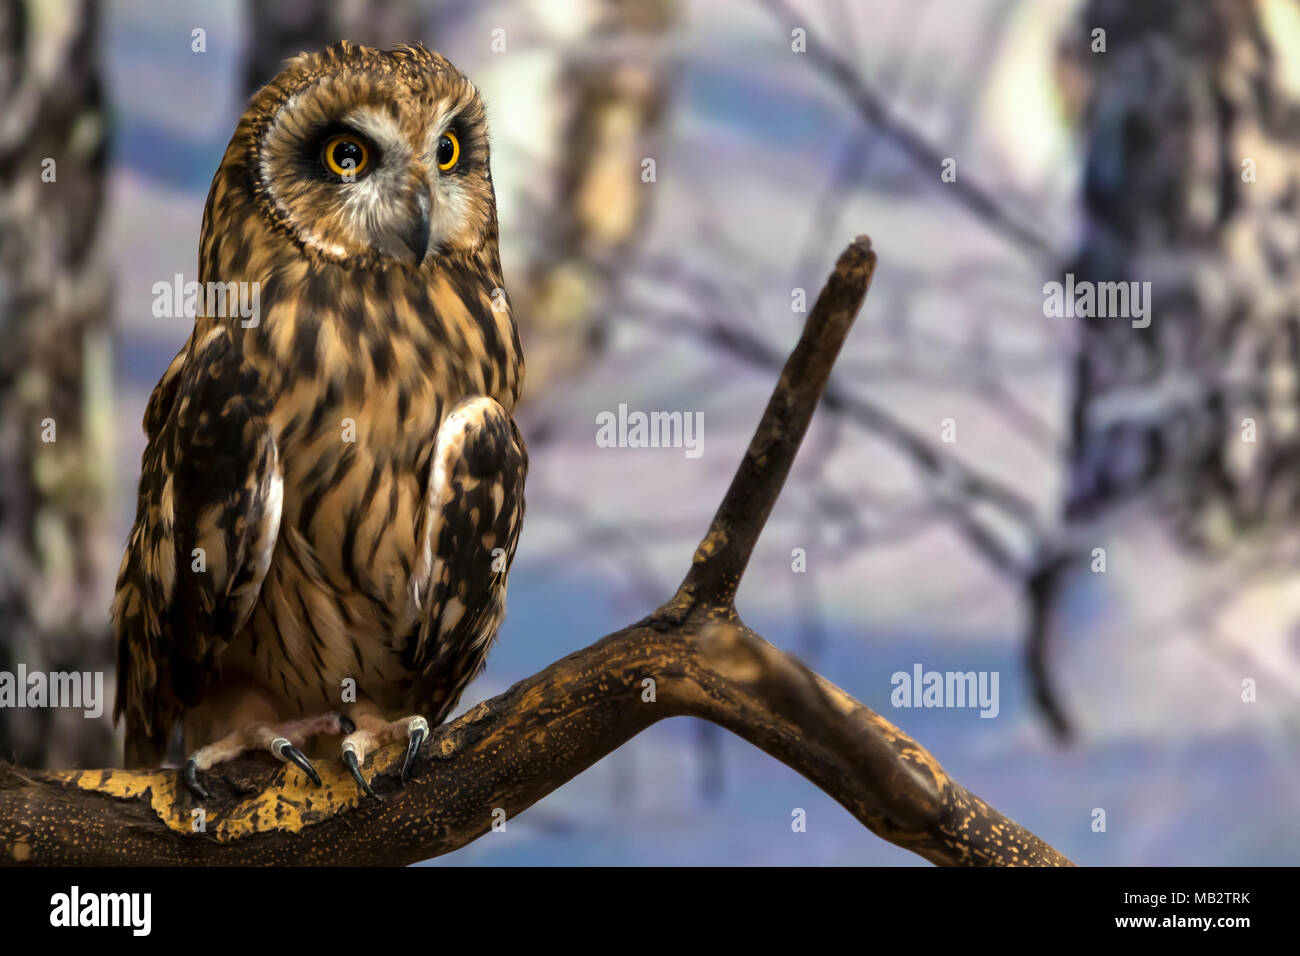 Сlose-up of a young beautiful brown owl  or asio otus with yellow eyes against a winter forest background Stock Photo